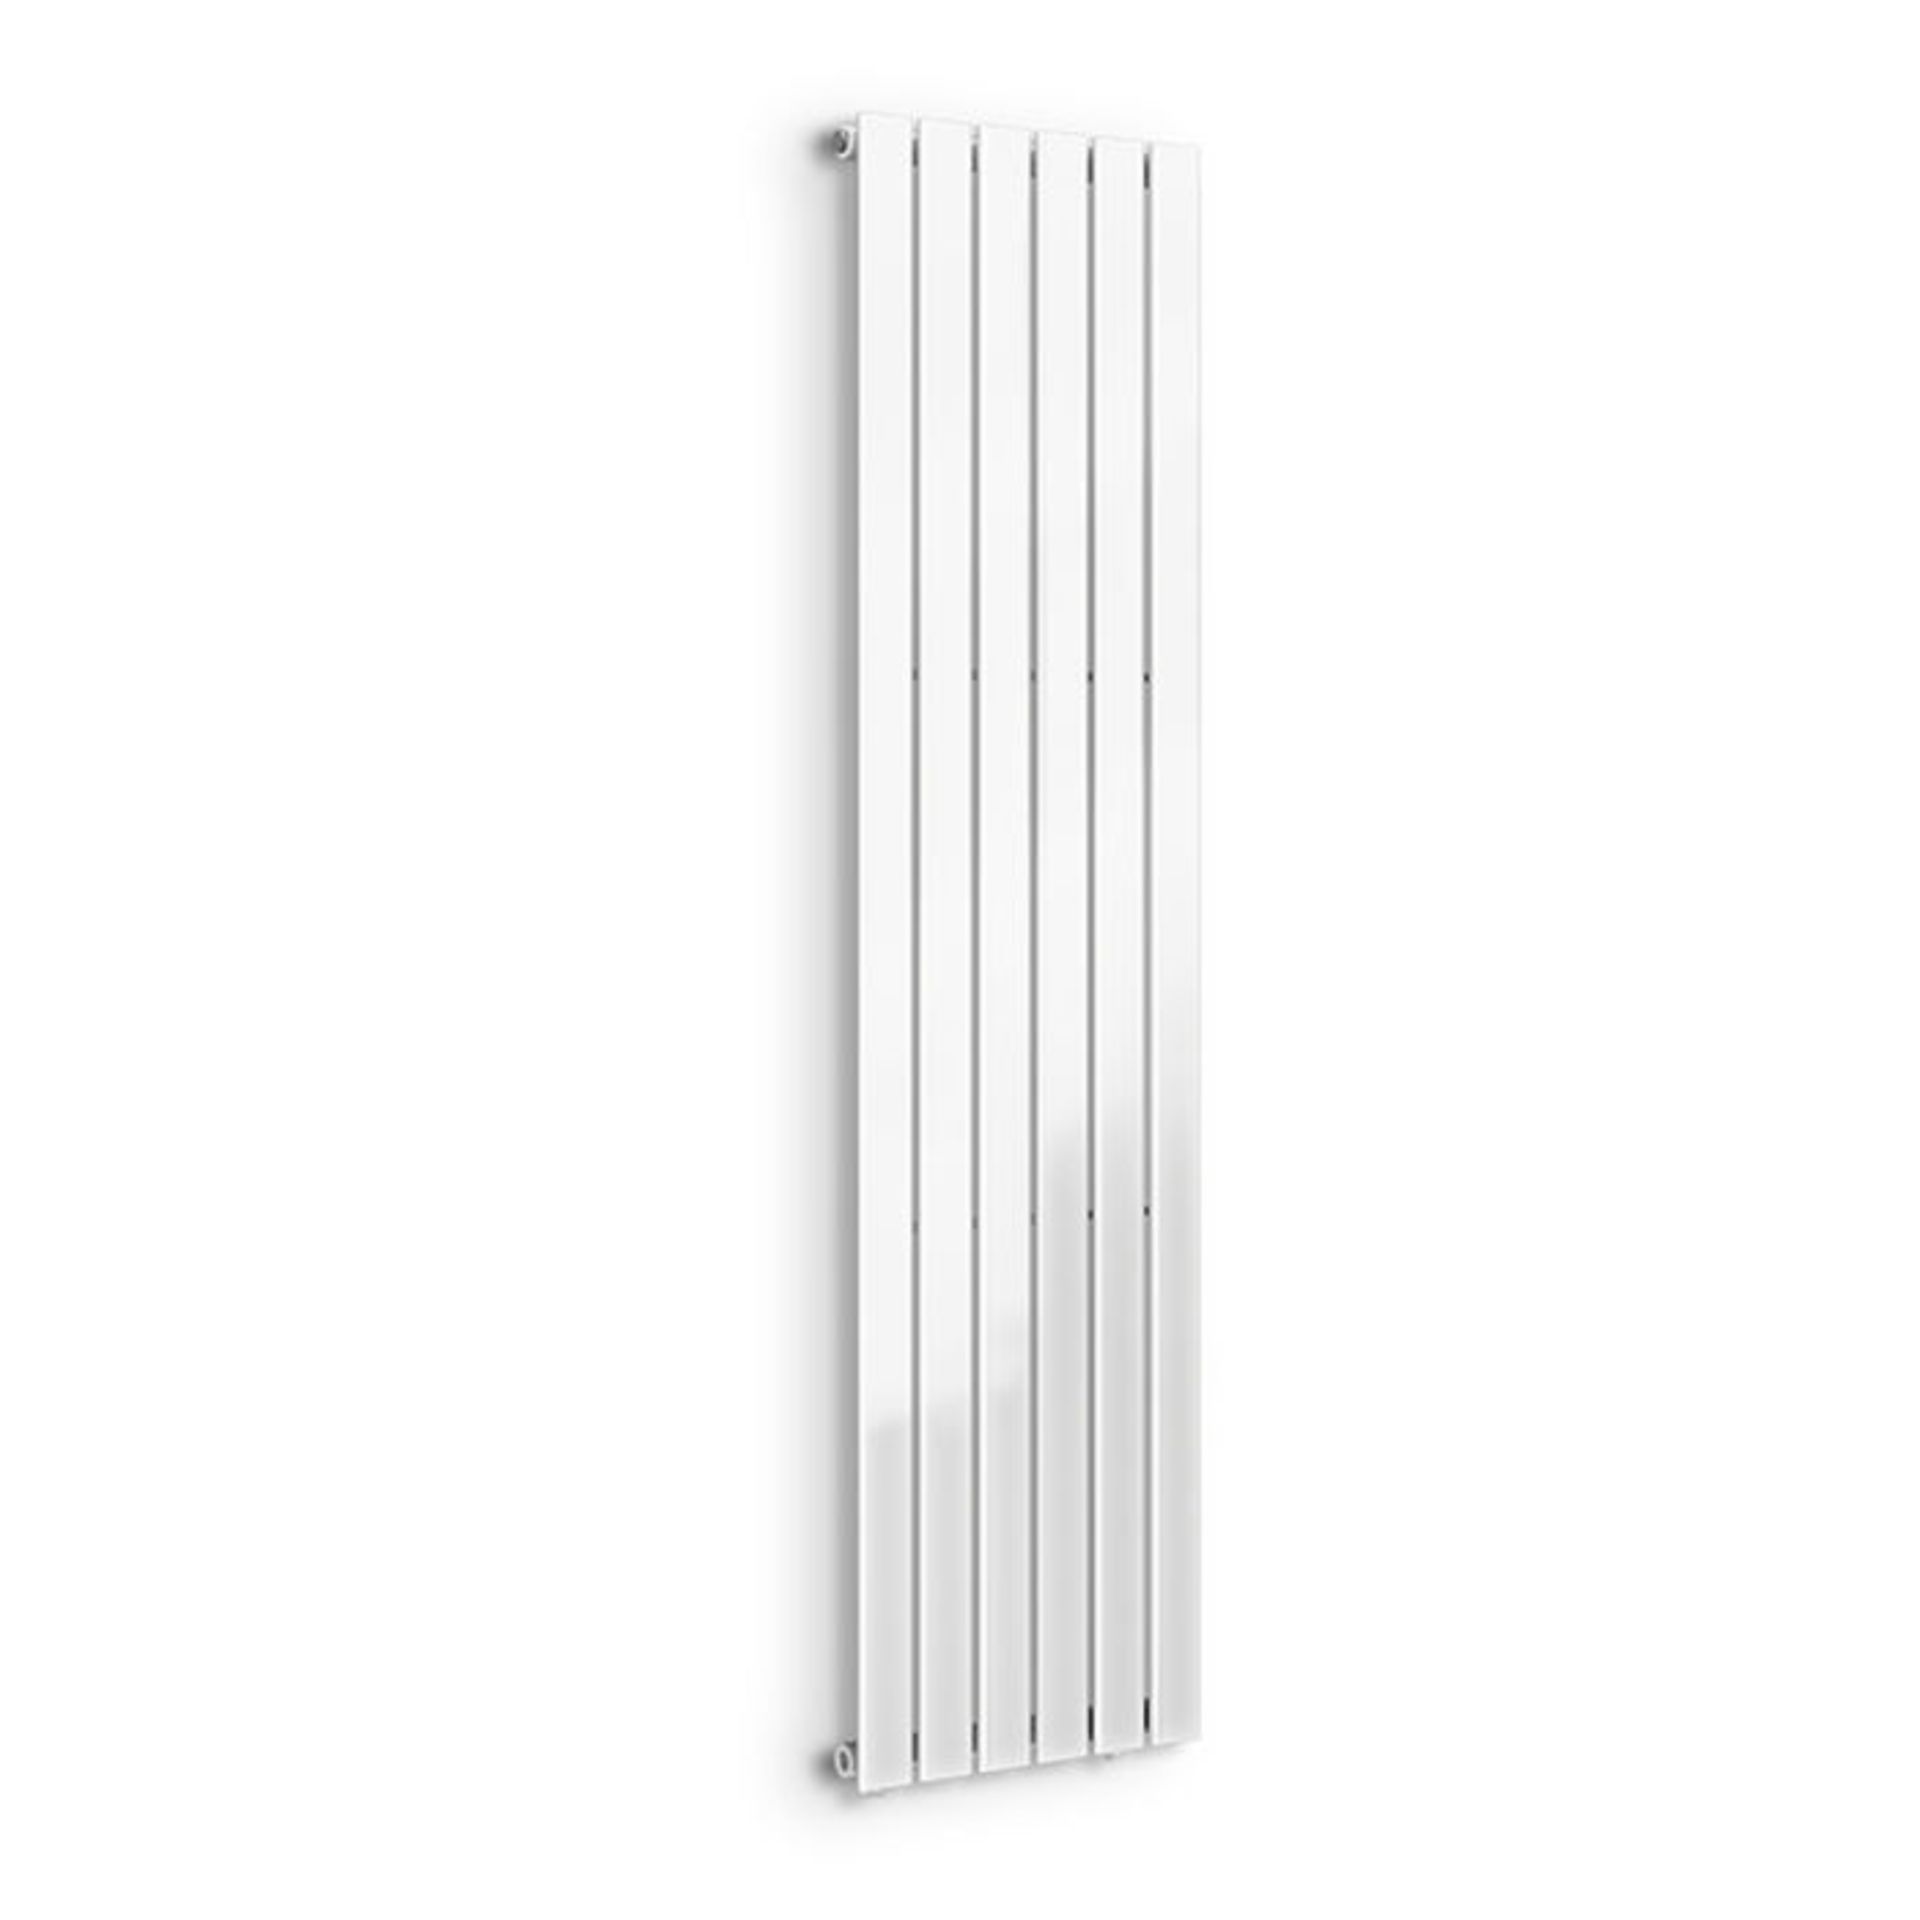 (EY220) 1800x433mm White Panel Vertical Radiator. RRP £246.00. Made from low carbon steel with a